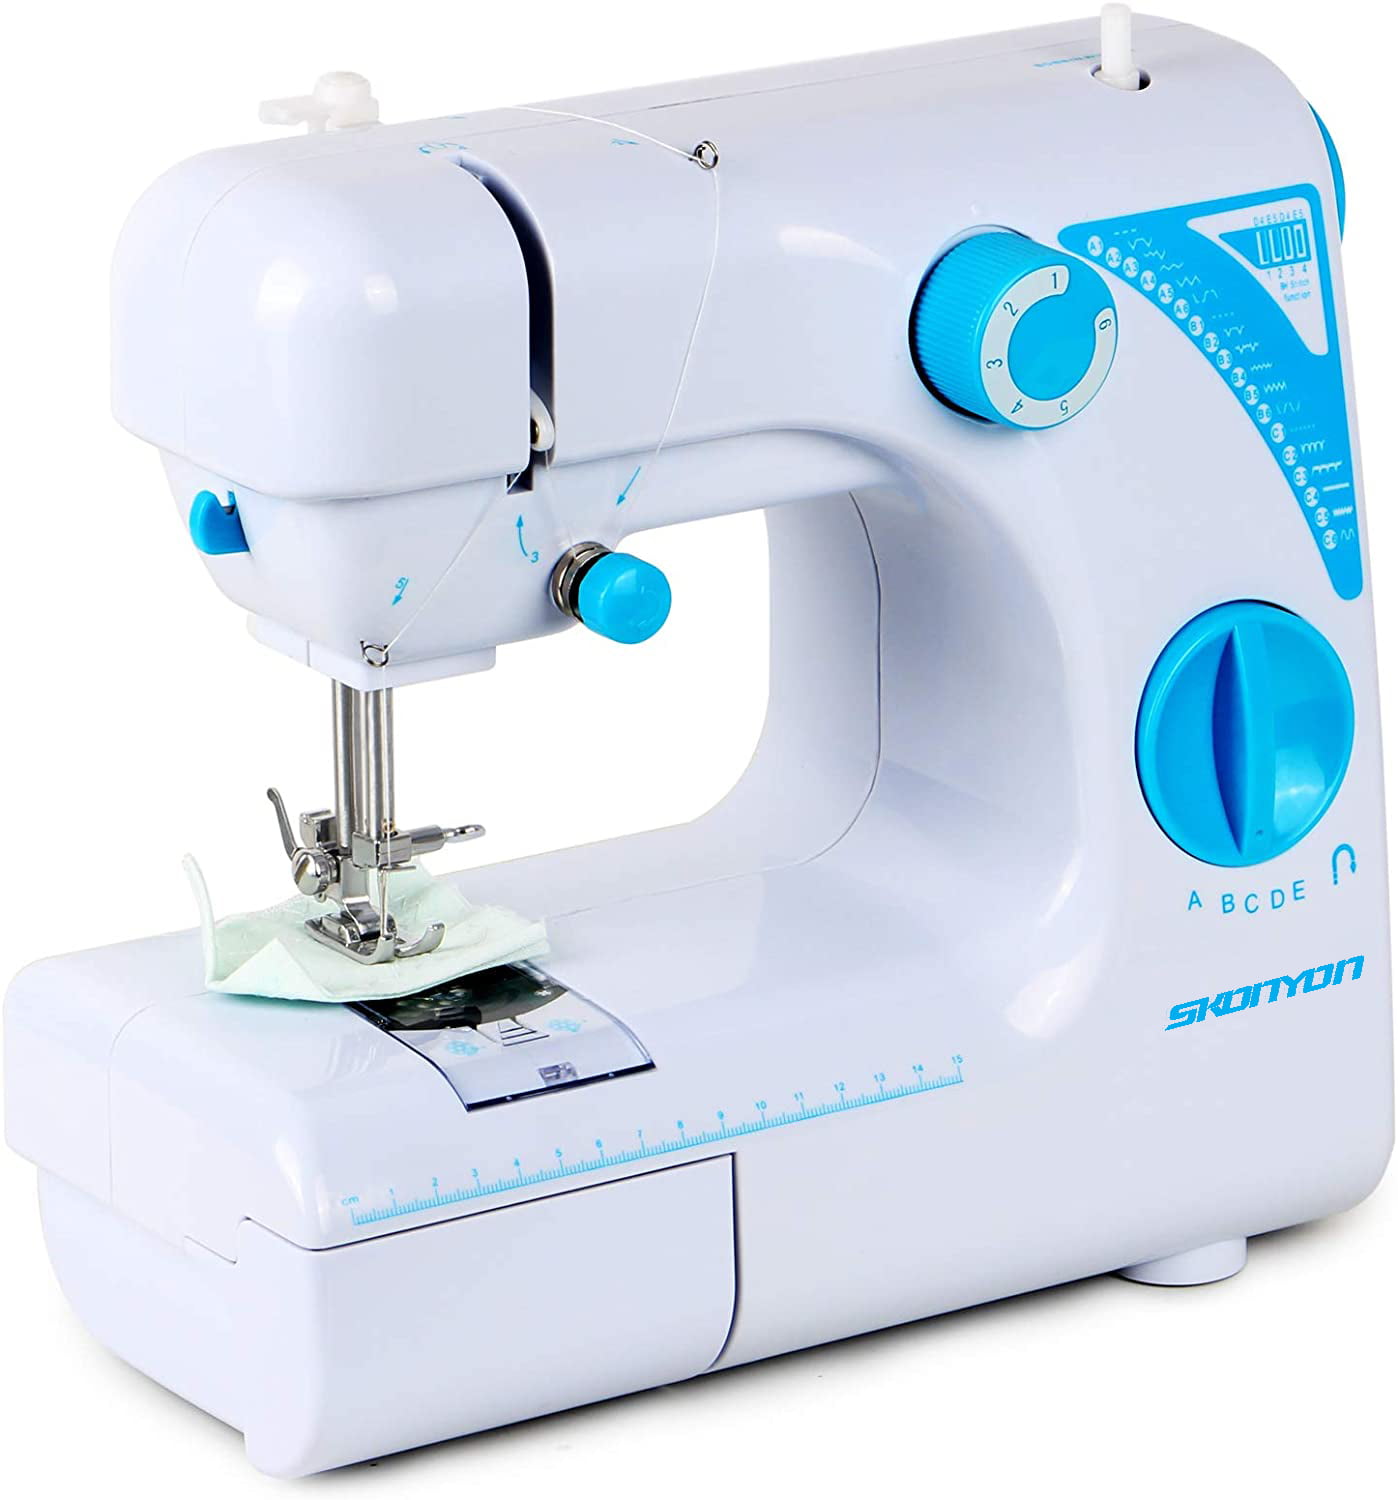 Mini Sewing Machine for Thick & Multiple Layers Fabrics Blue Foot Pedal Operation 2 Speed Embroidery Stitching Heavy Duty Quilting Machine Easy to Use with Extension Table